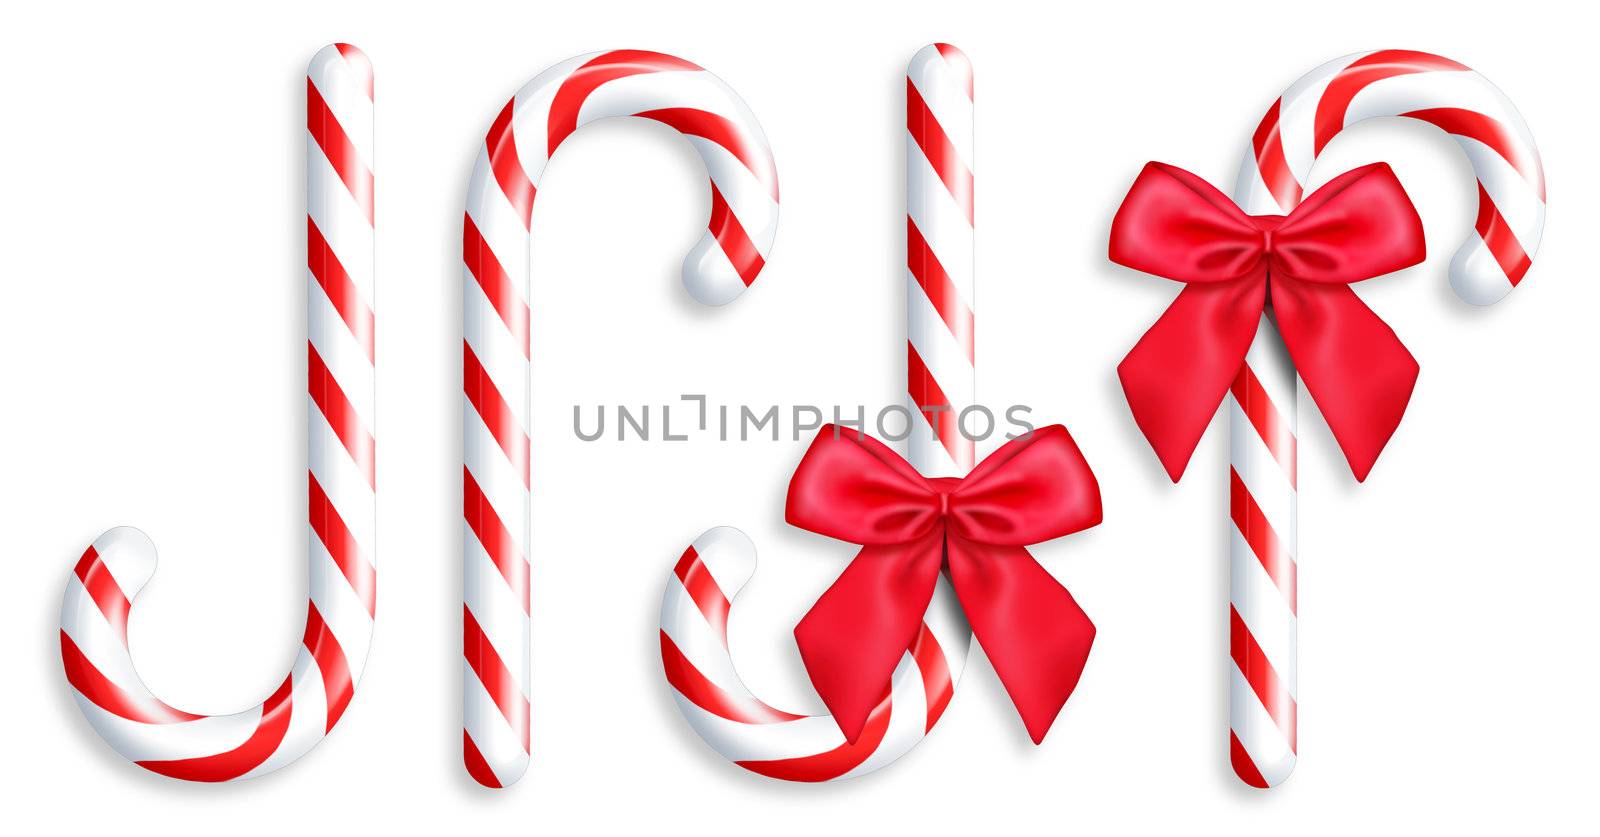 Illustrated Candy Canes by komodoempire